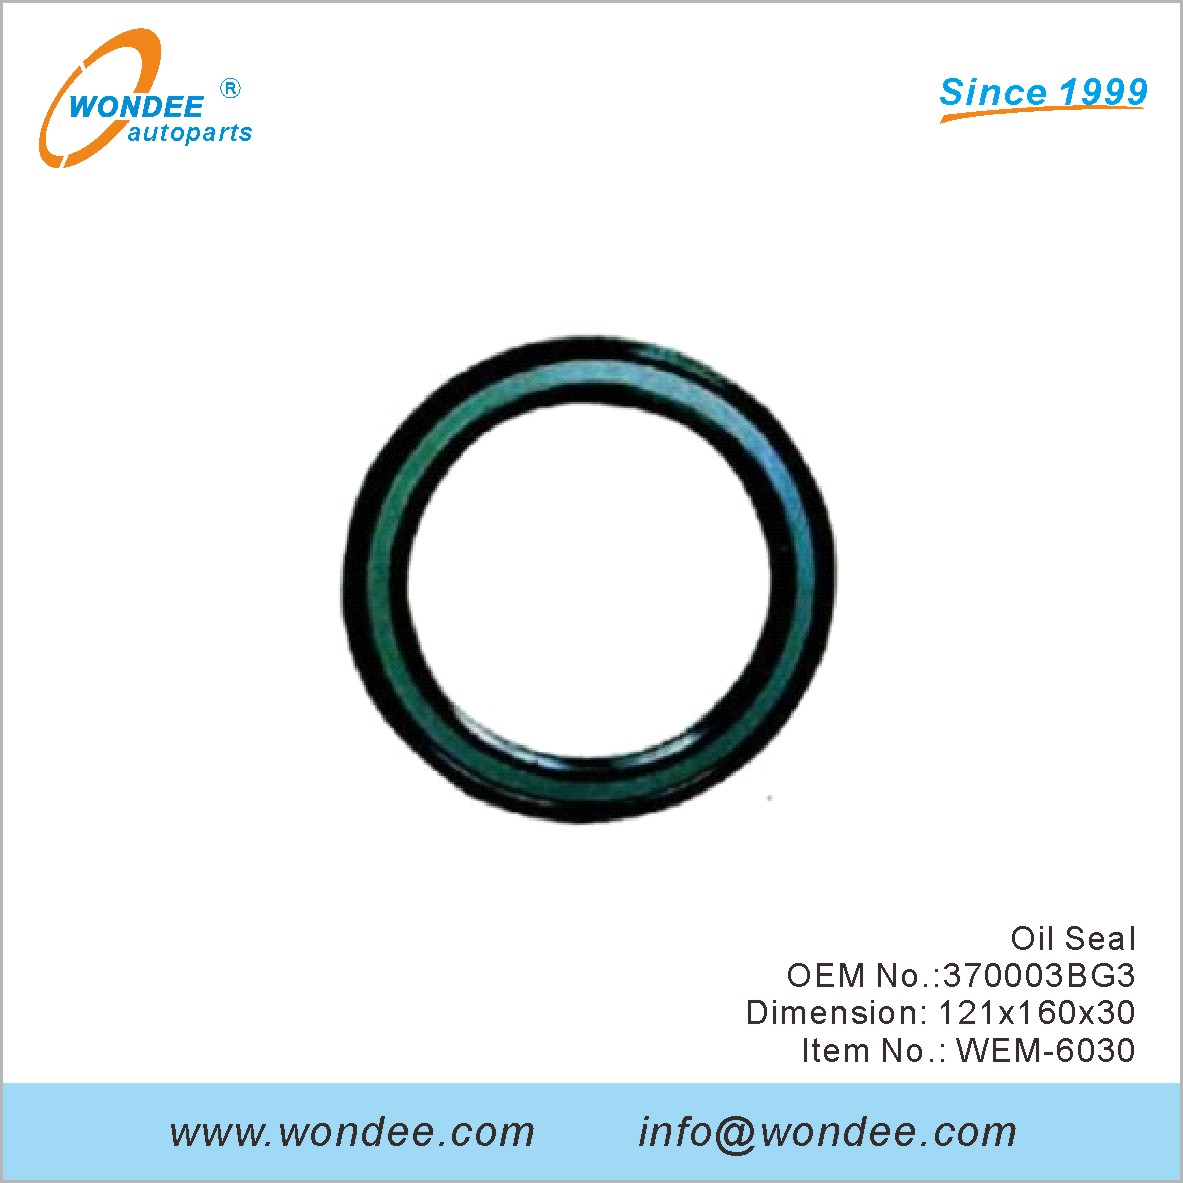 Oil Seal OEM 370003BG3 for engine mouting from WONDEE